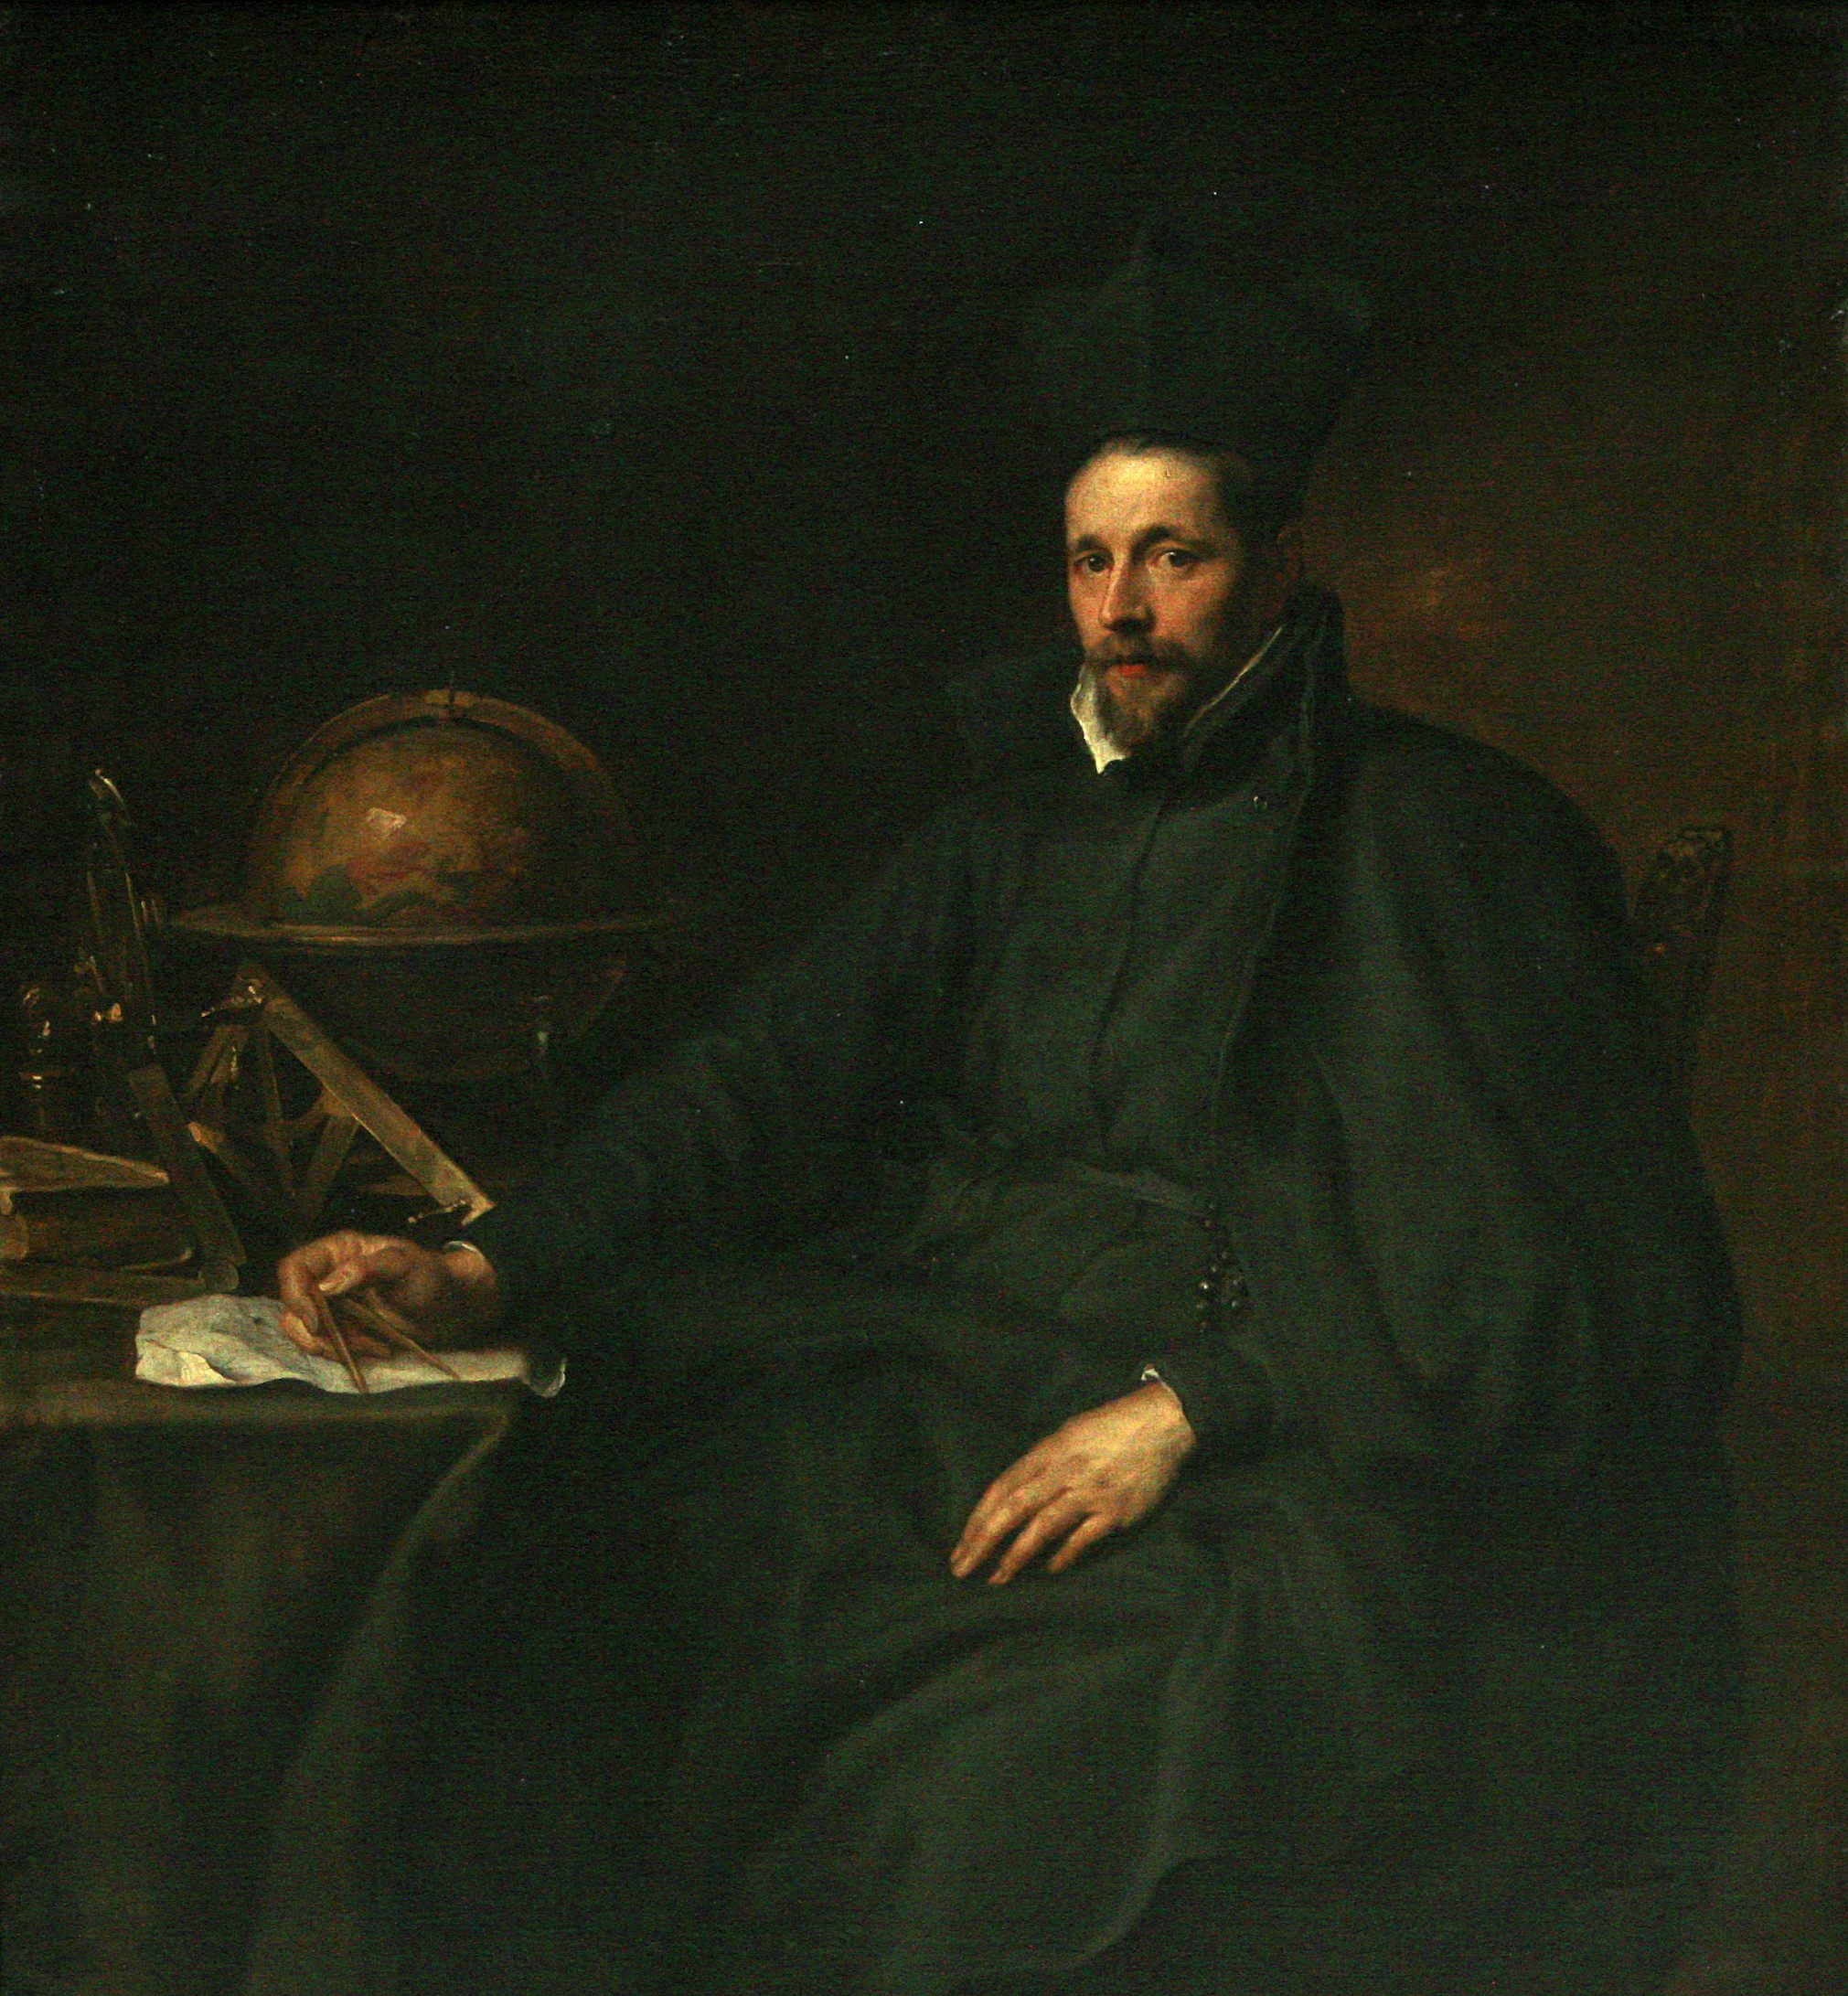 Father Jean-Charles della Faille by Anthony van Dyck - 1629 - 130,8 x 118,5 The Royal Museums of Fine Arts of Belgium